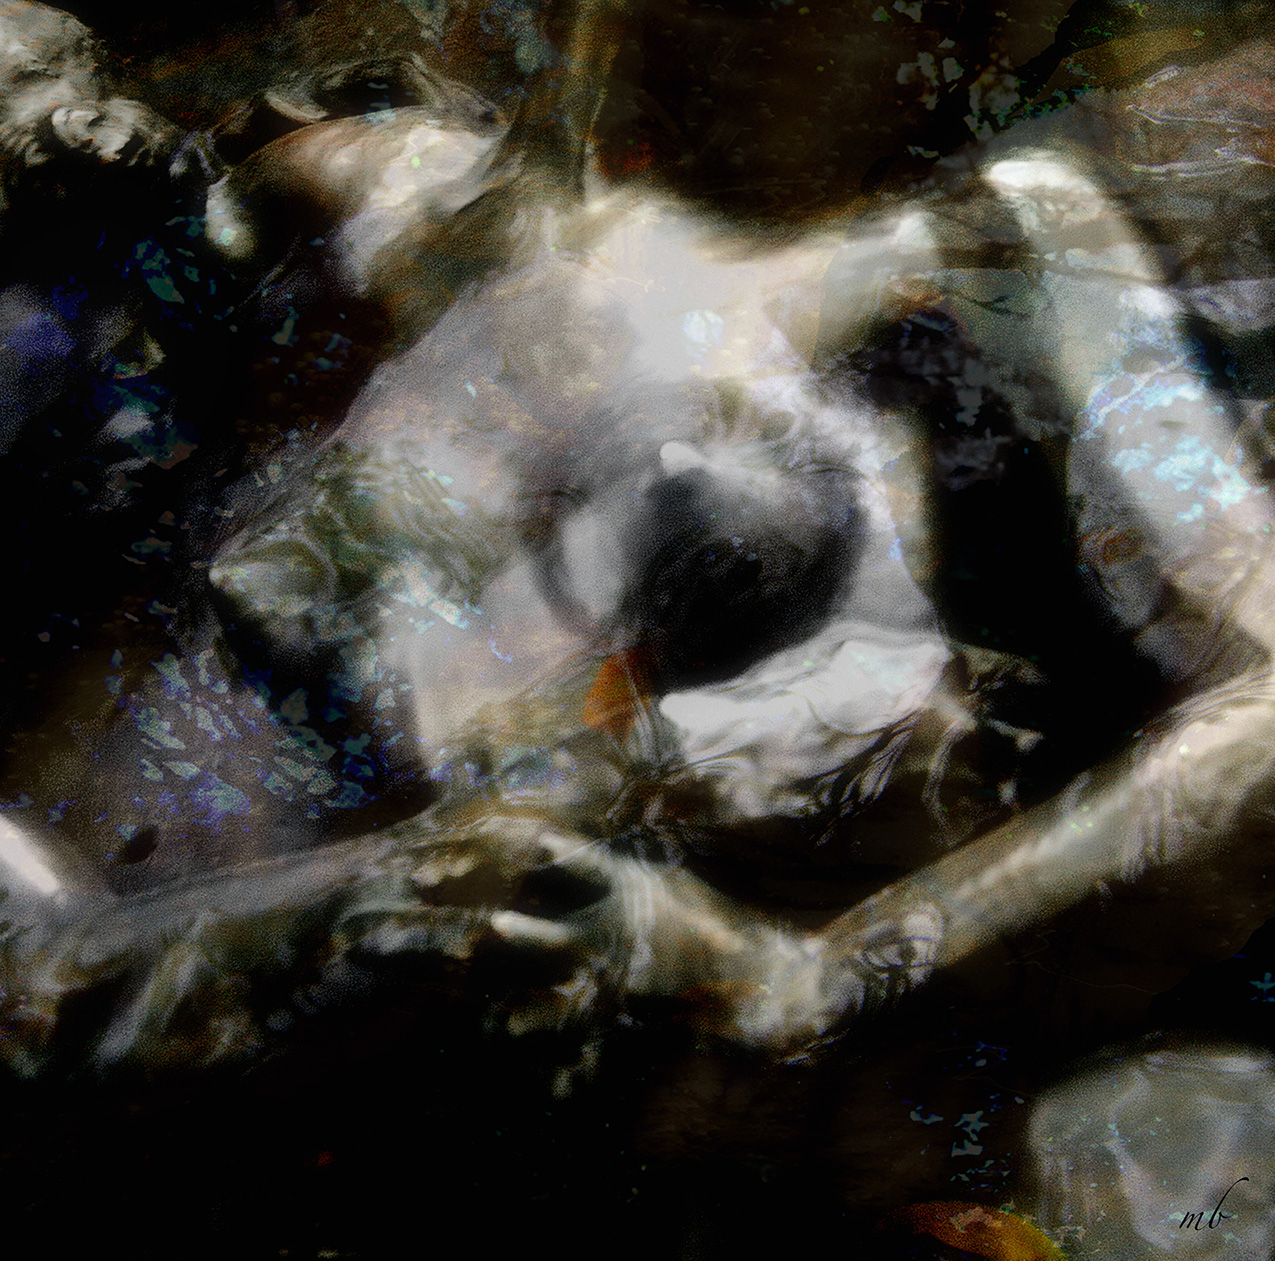 abstract image in the style of double exposure photography. the female figure is distorted and overlaid with water ripples and various colors.